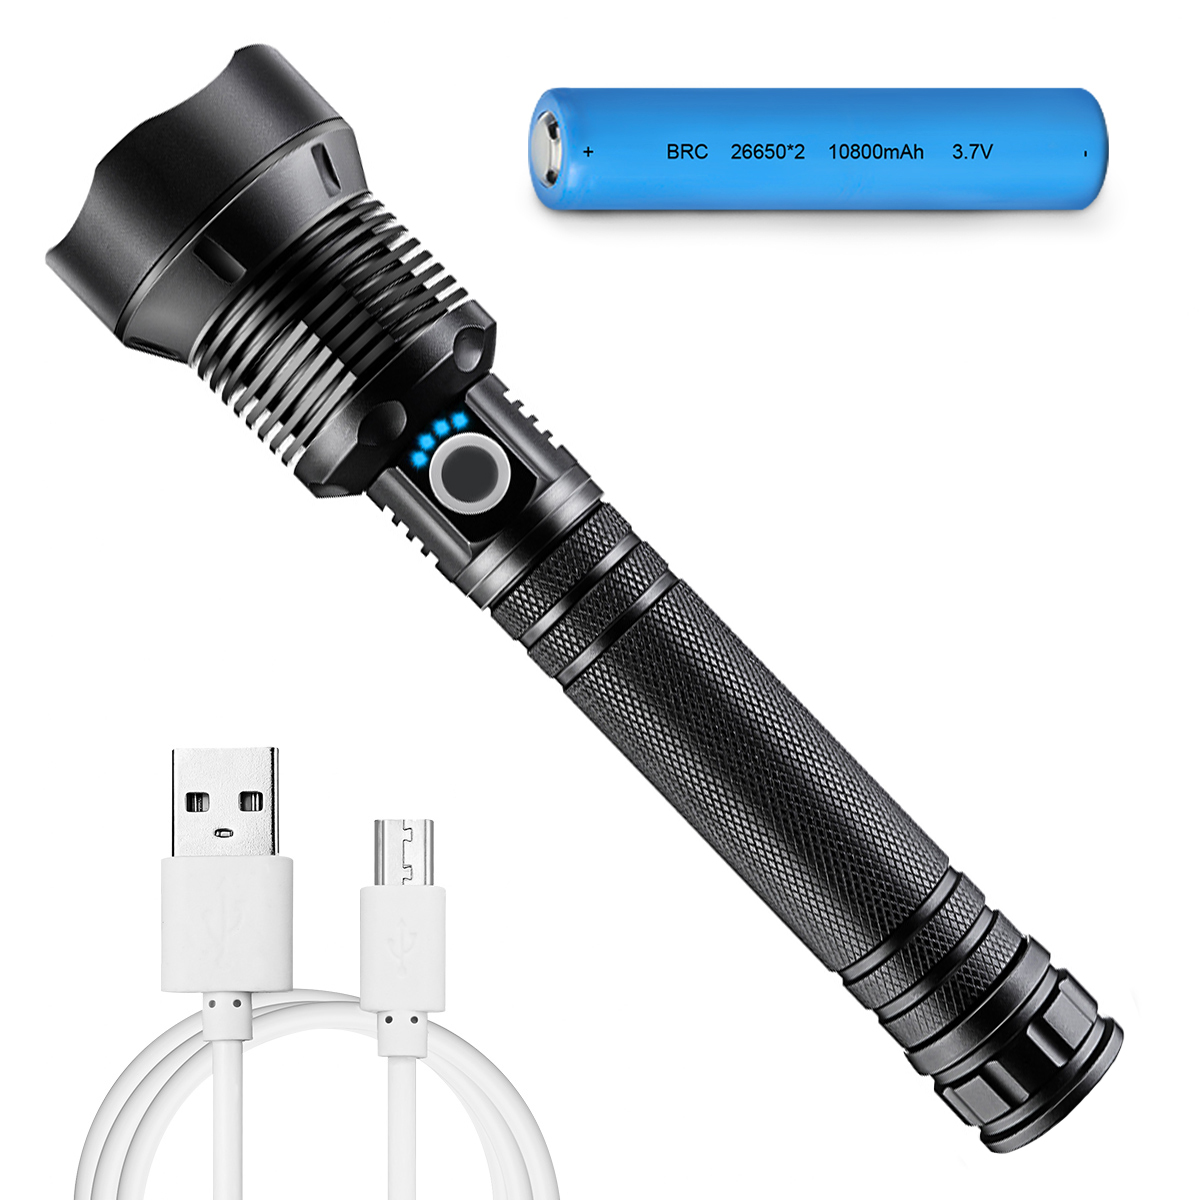 OUTERDO-XHP702-90000-Lumens-26650-Battery-LED-Flashlight-USB-Rechargeable-Outdoor-Waterproof-Tactica-1890704-9